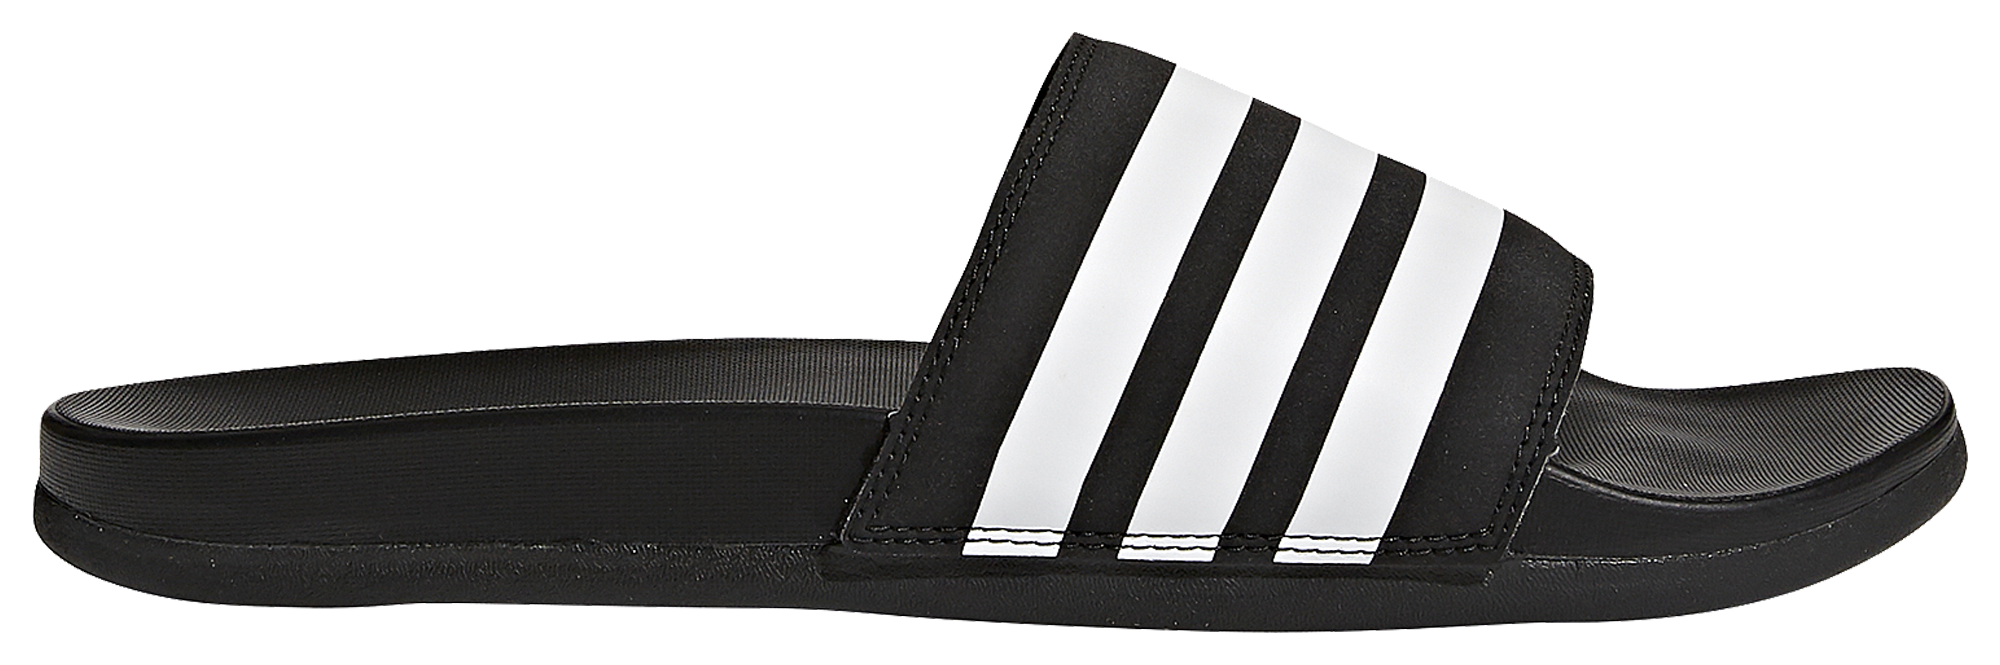 adidas slippers sports direct